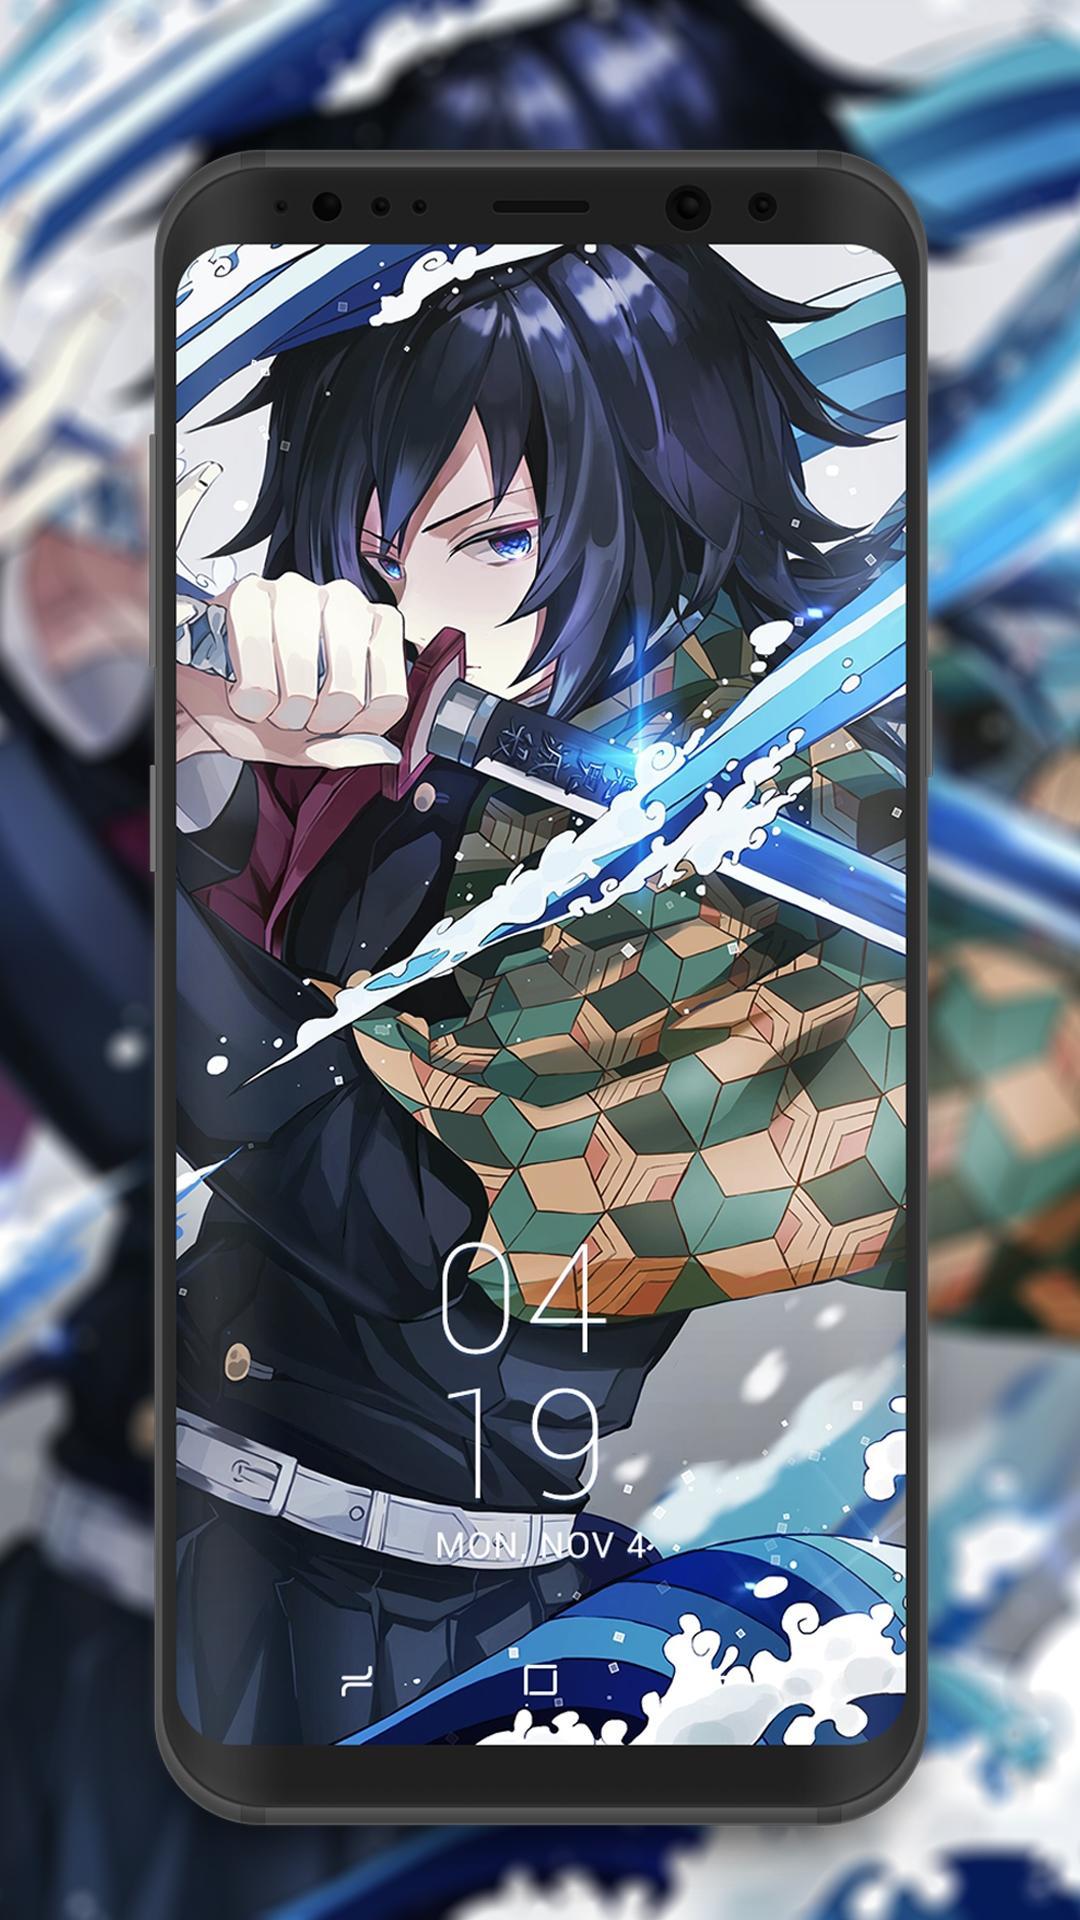 My Animepapers Anime Wallpapers For Android Apk Download